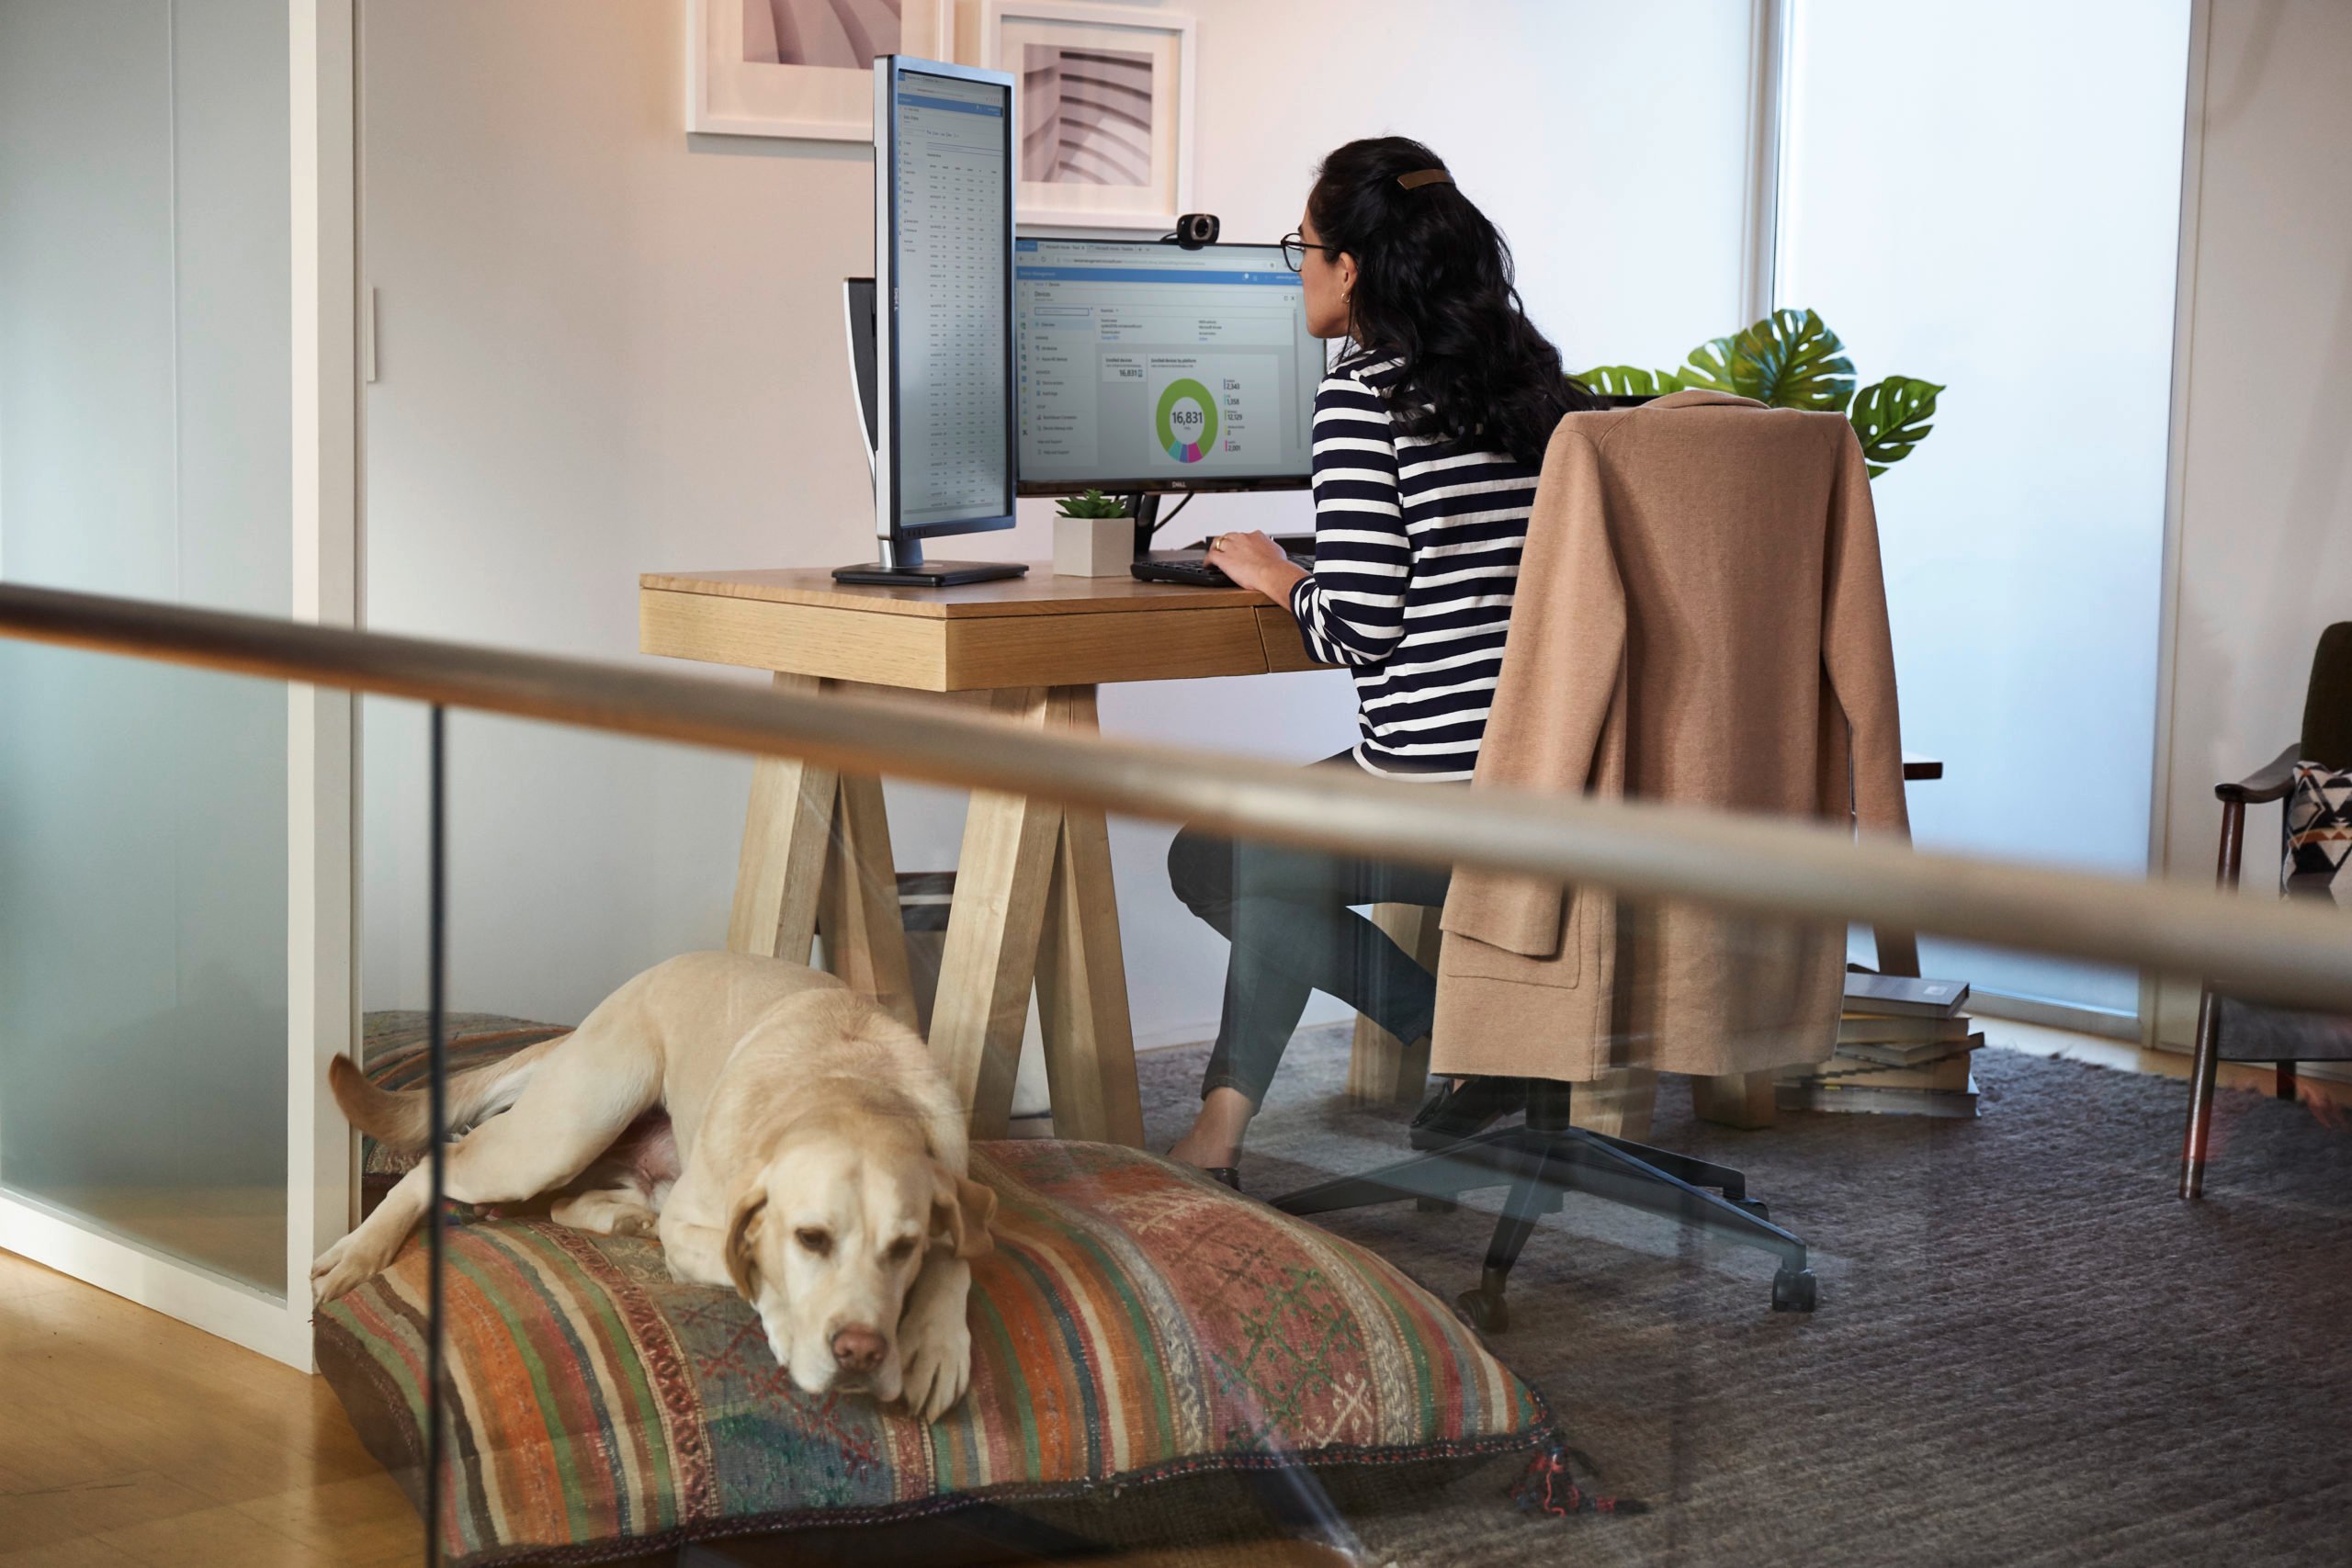 Woman working from her home office with dog next to her on the floor